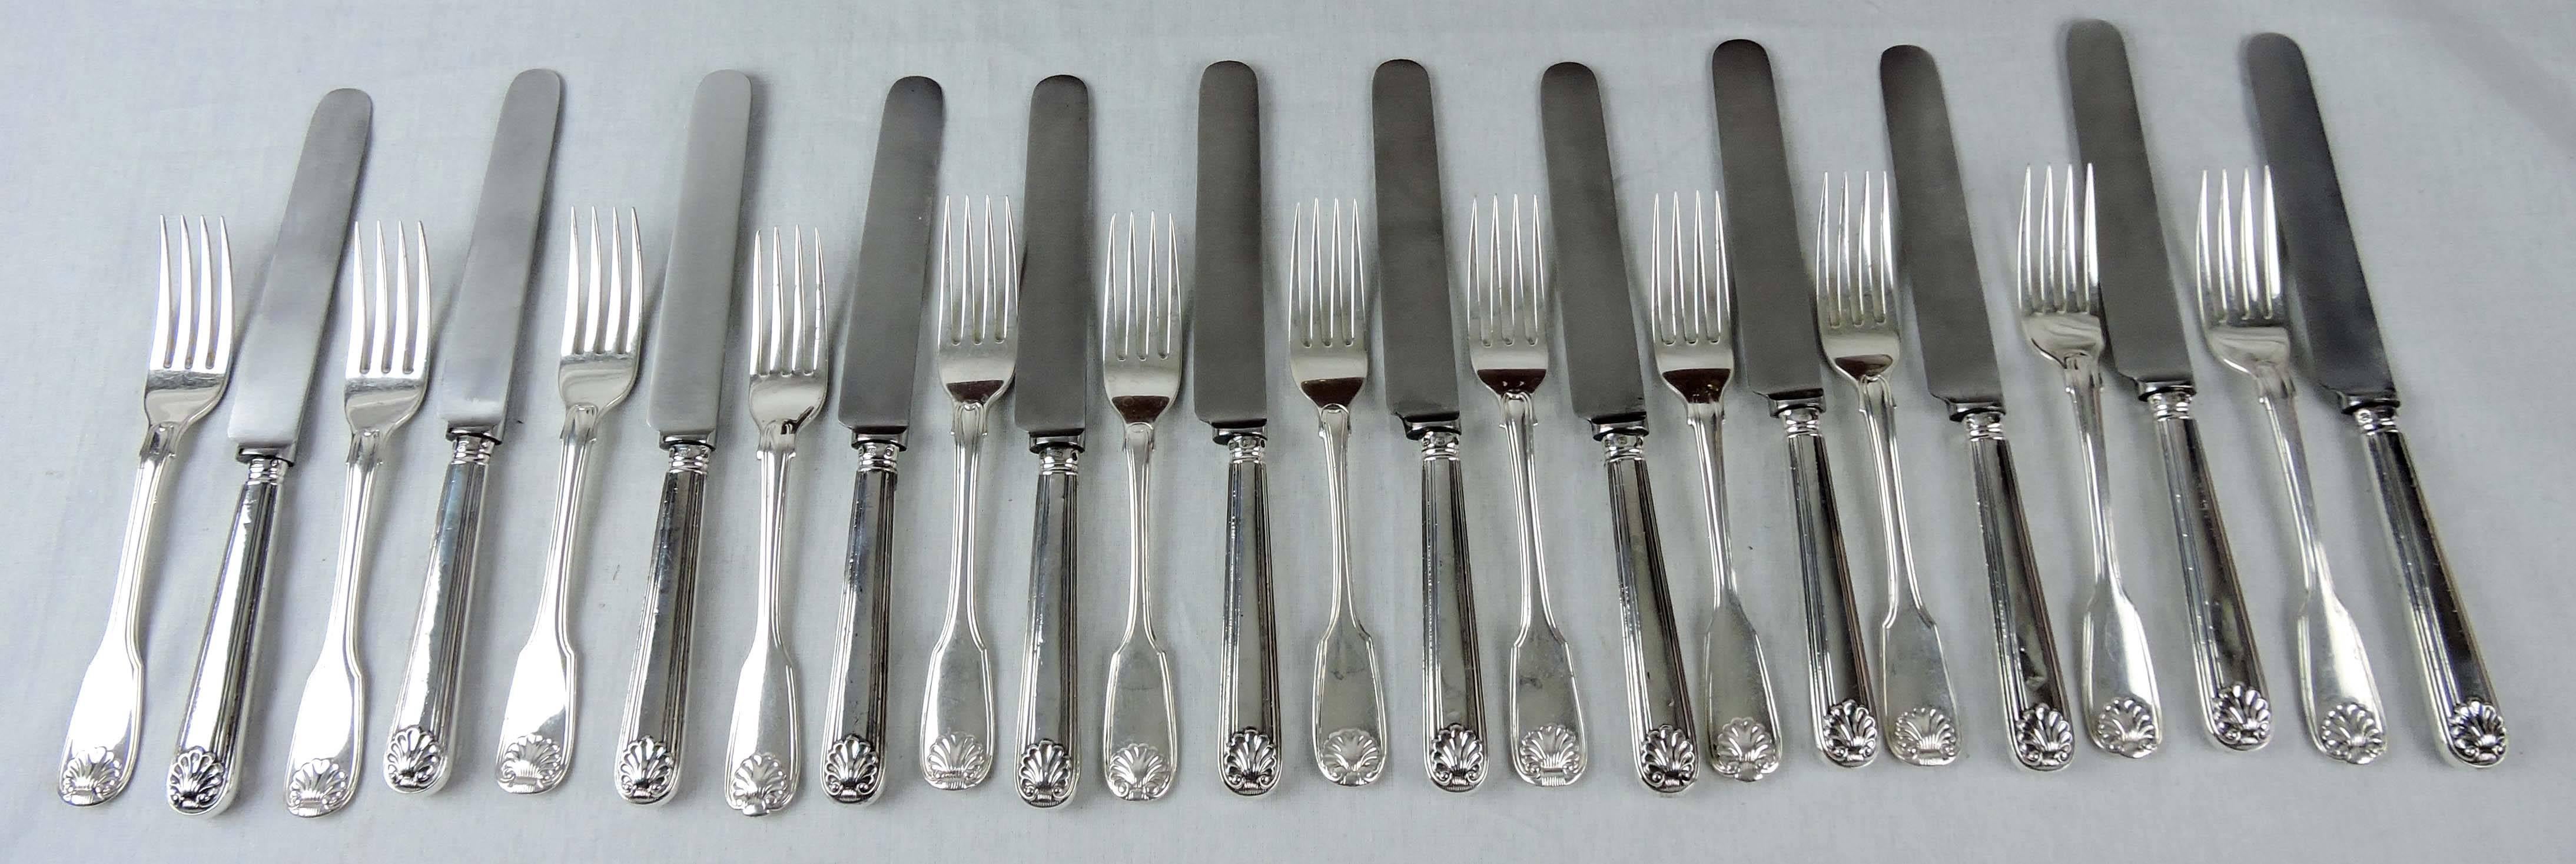 Georian Period Fiddle, Thread & Shell Sterling Silver Flatware Dinner Set for 12 For Sale 1